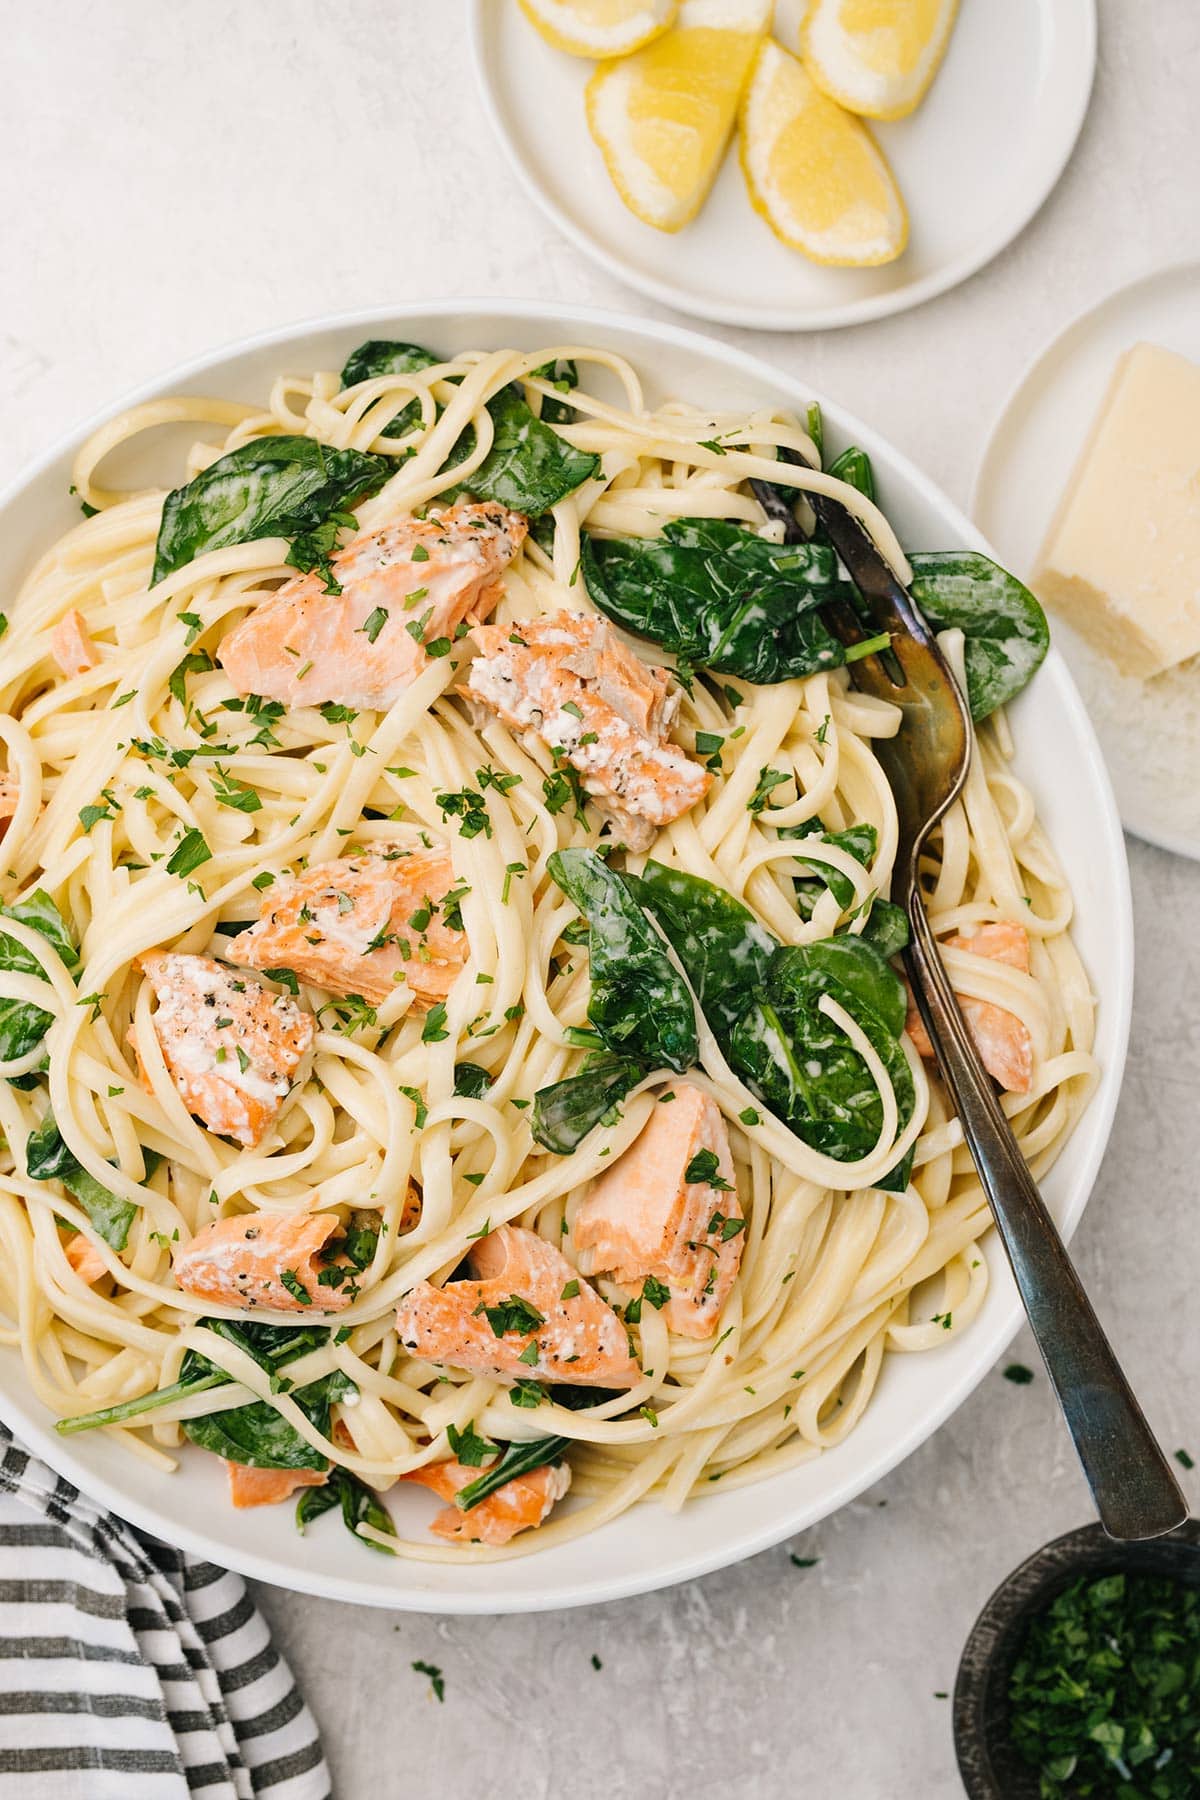 A plate of creamy salmon pasta with spinach with lemon wedges and grated Parmesan cheese on the side.